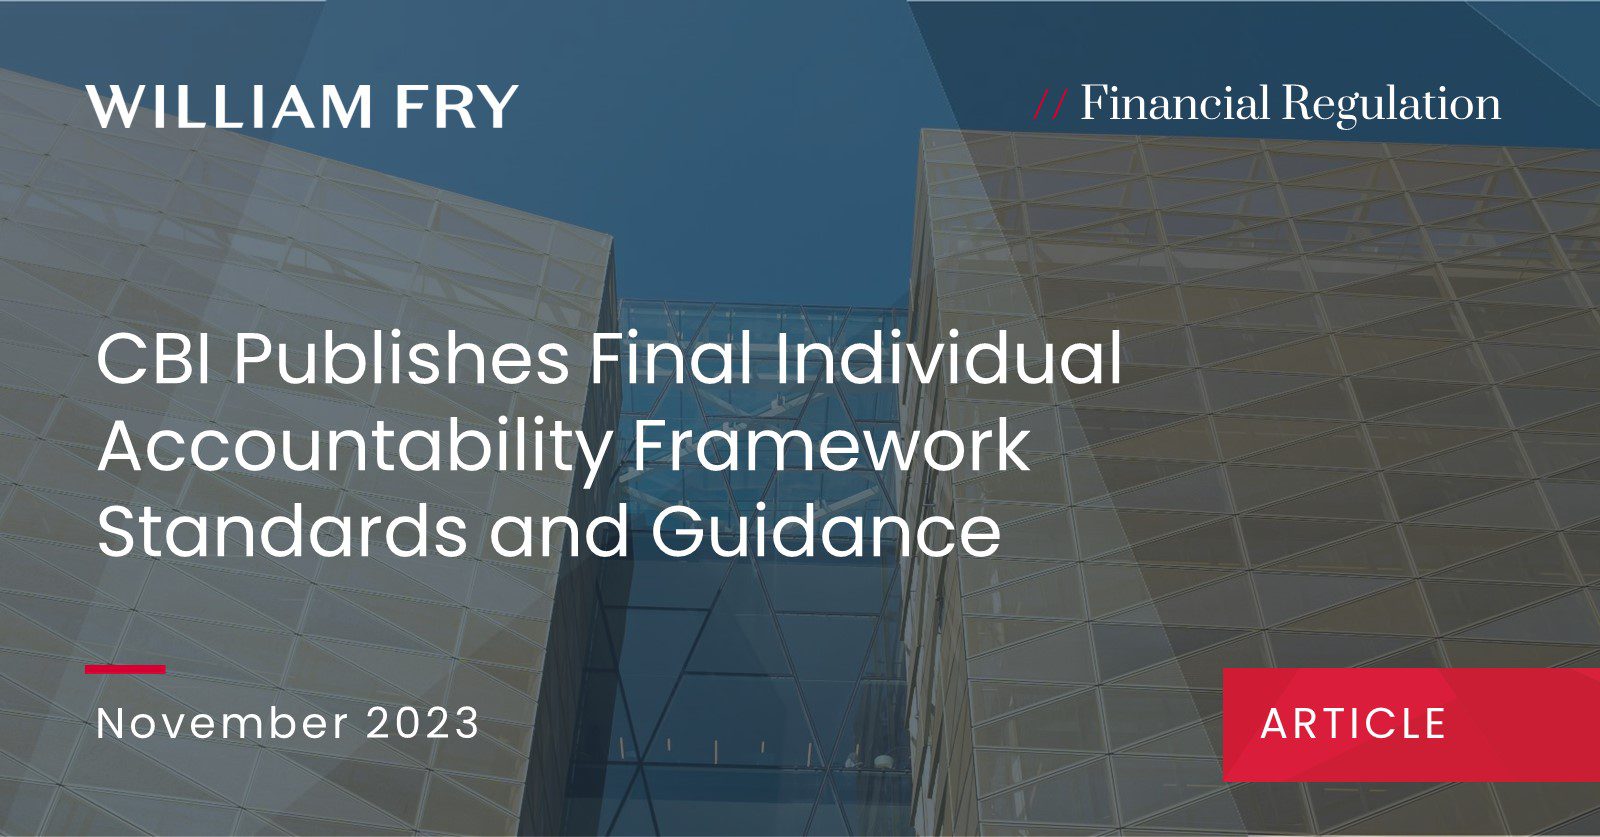 CBI Publishes Final Individual Accountability Framework Standards and Guidance